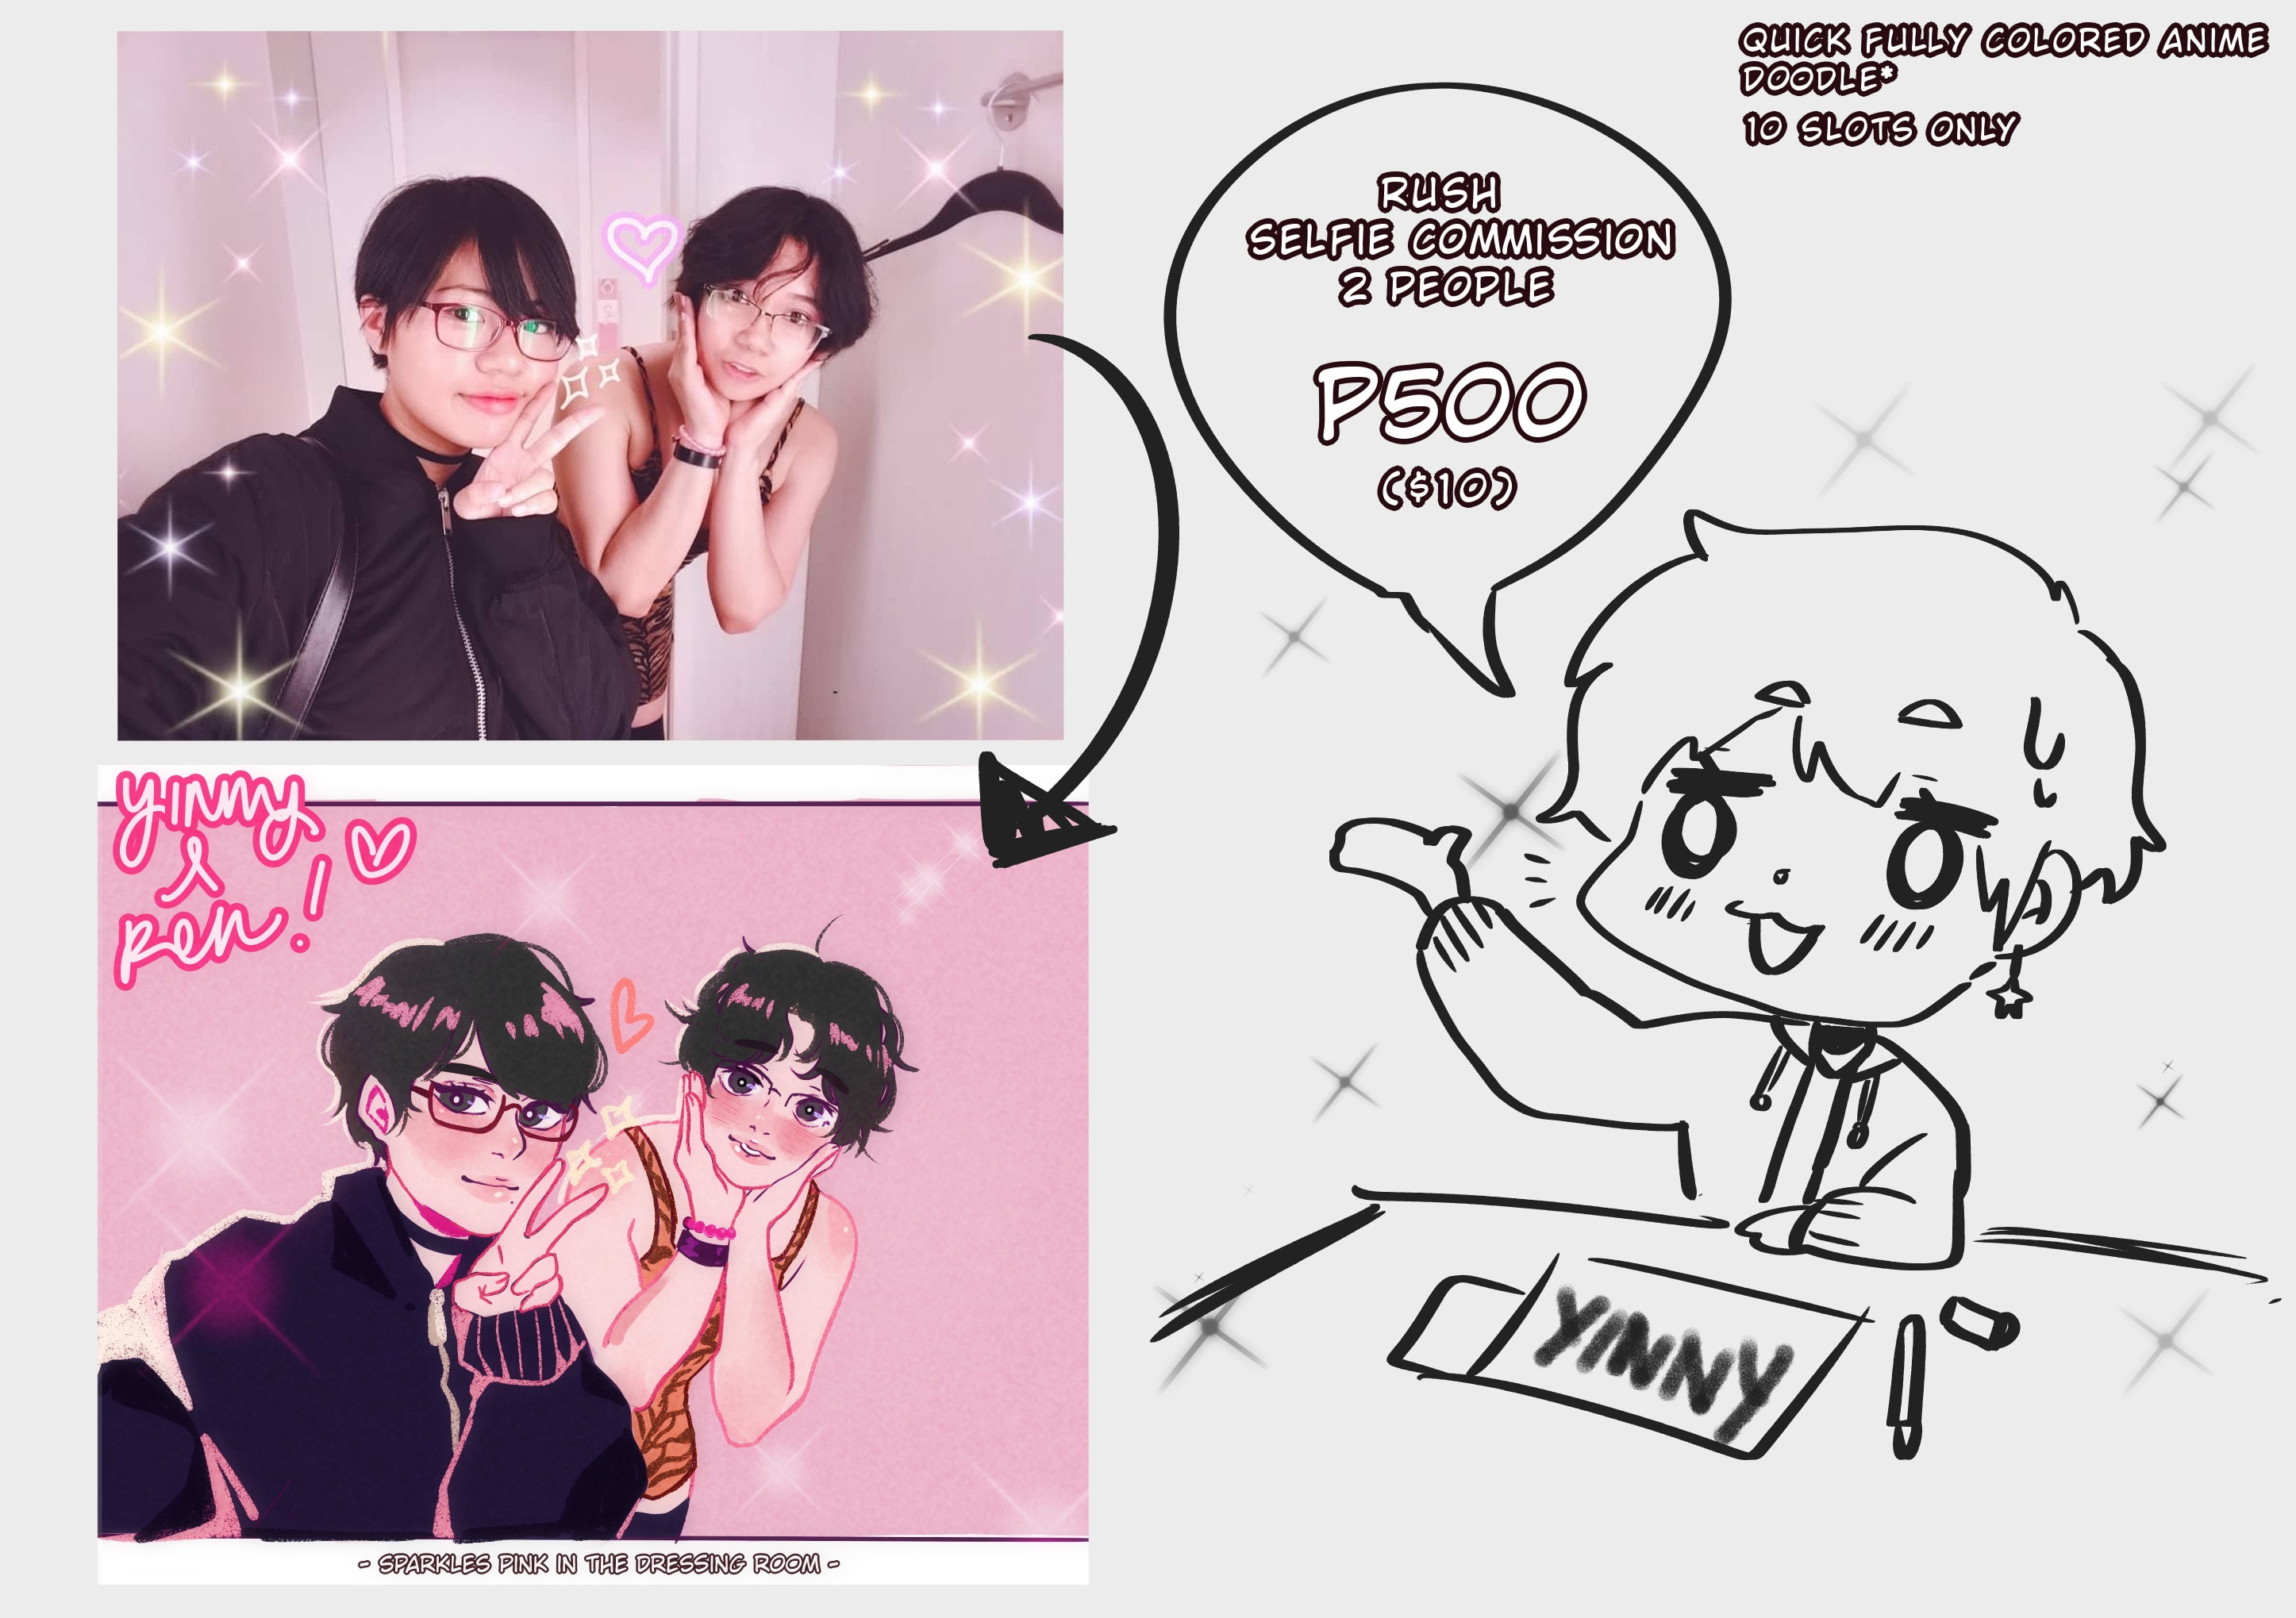 Draw couple selfies 90s anime style by Yinnytea | Fiverr